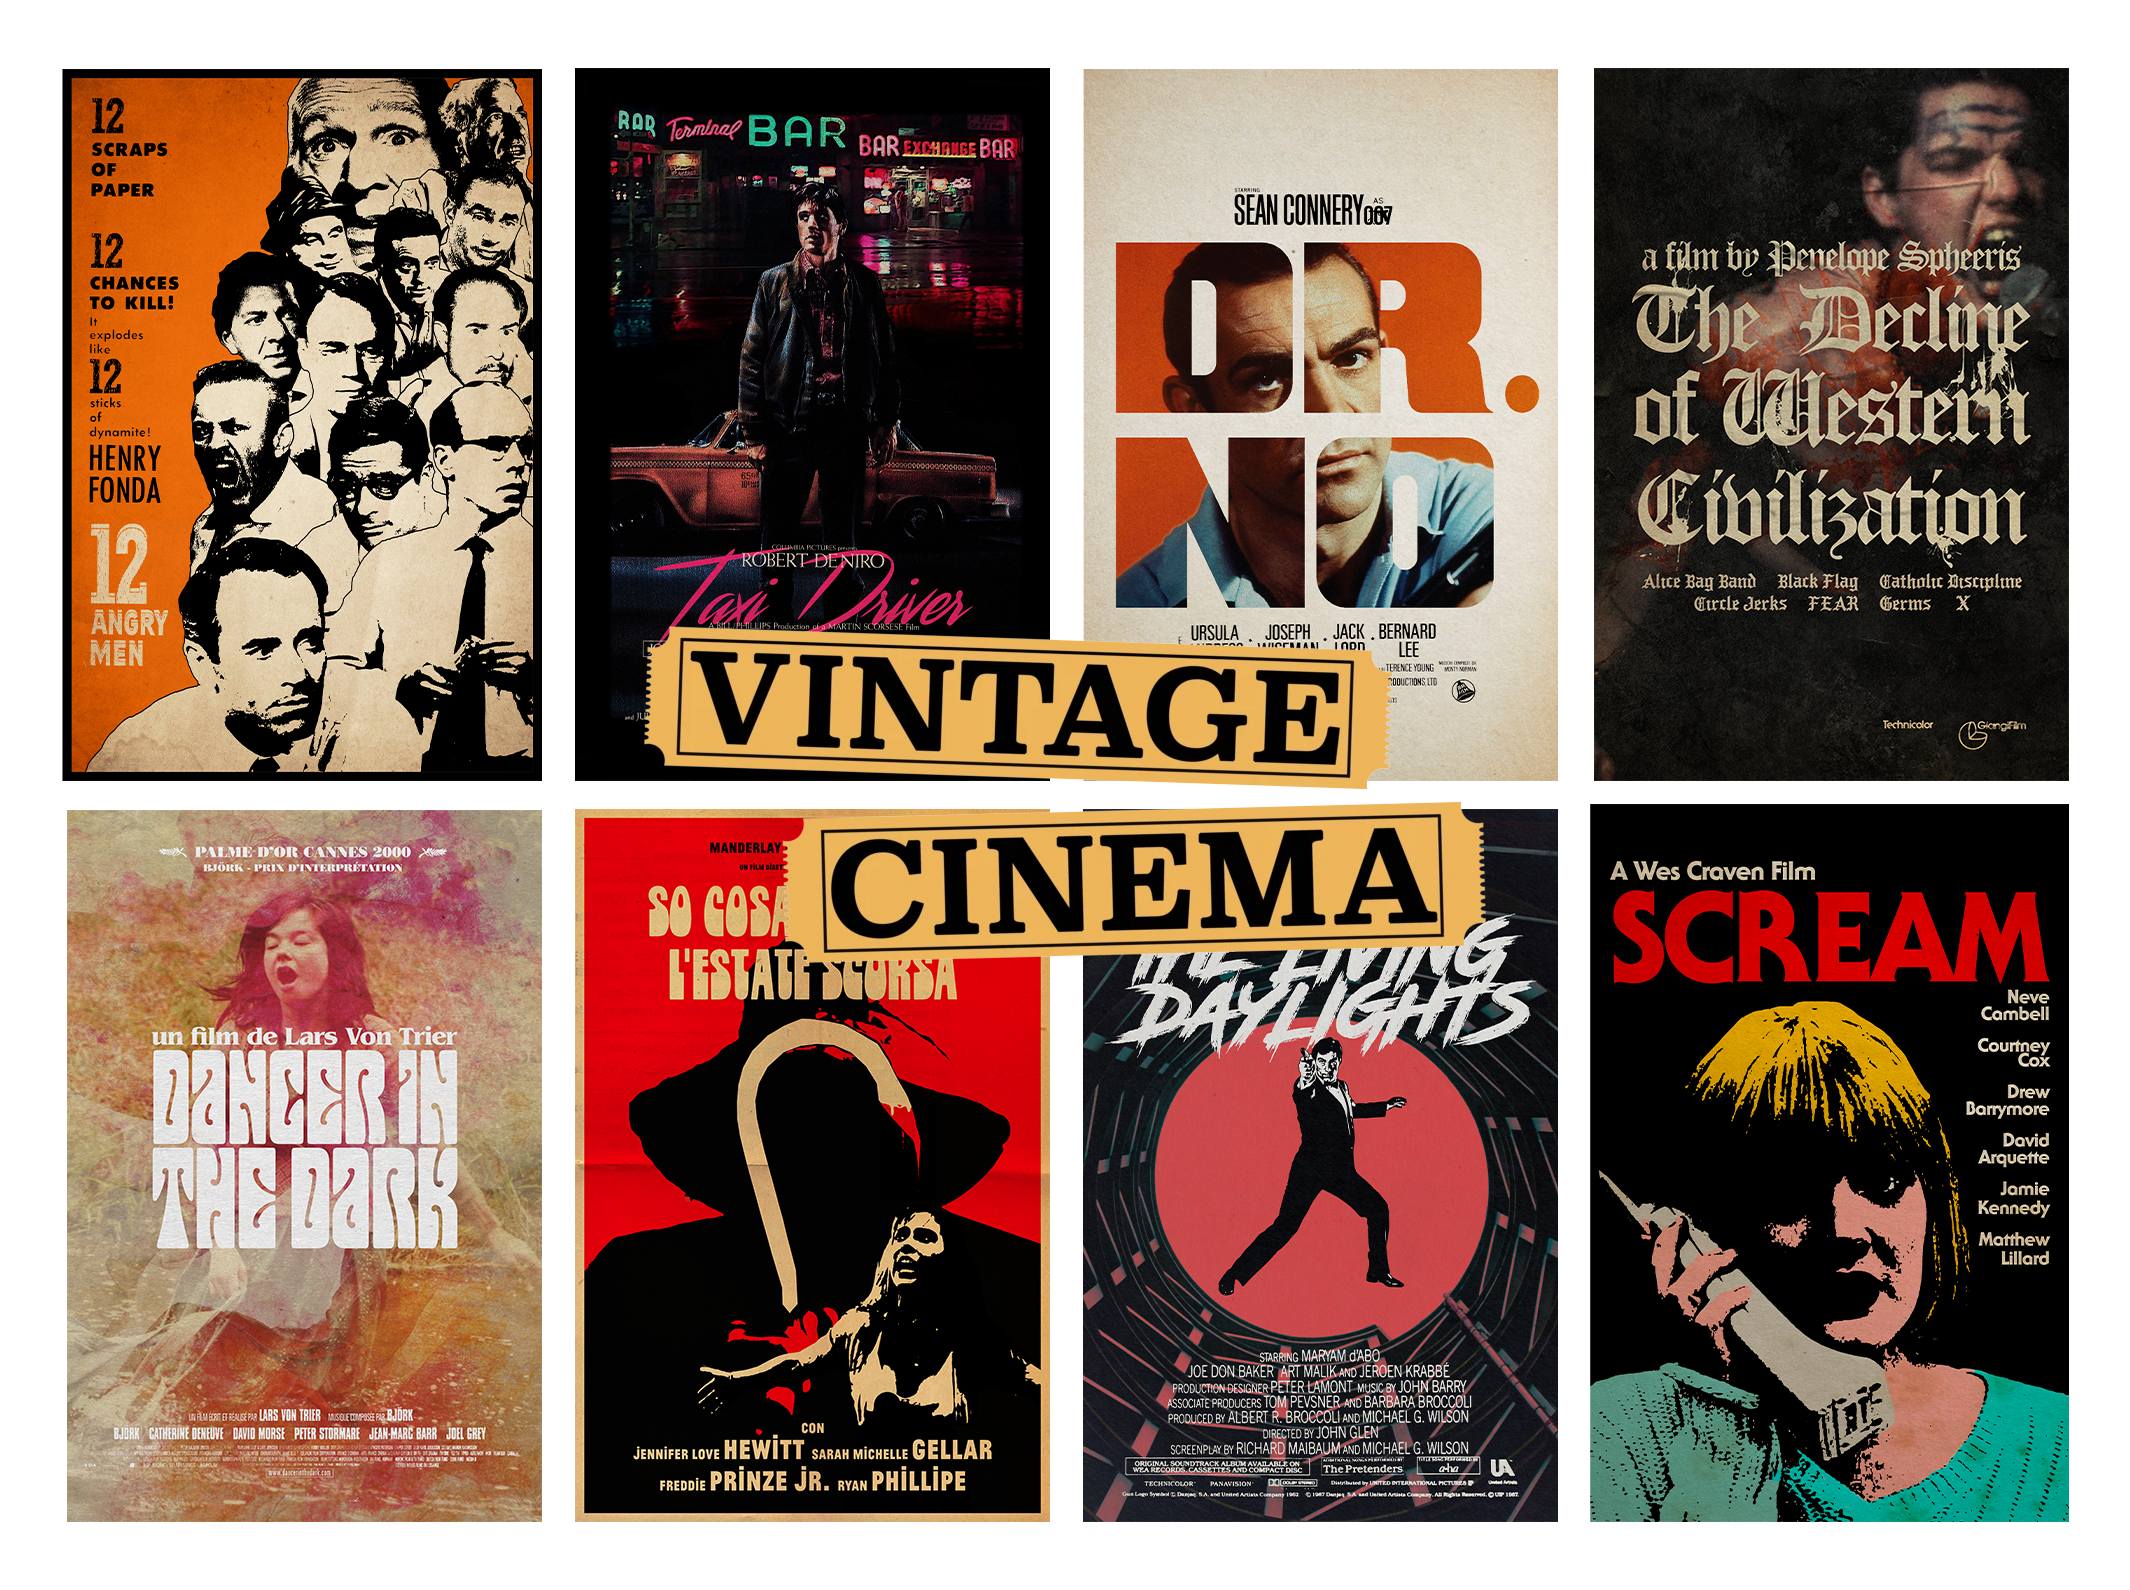 Posters available through Vintage Cinema